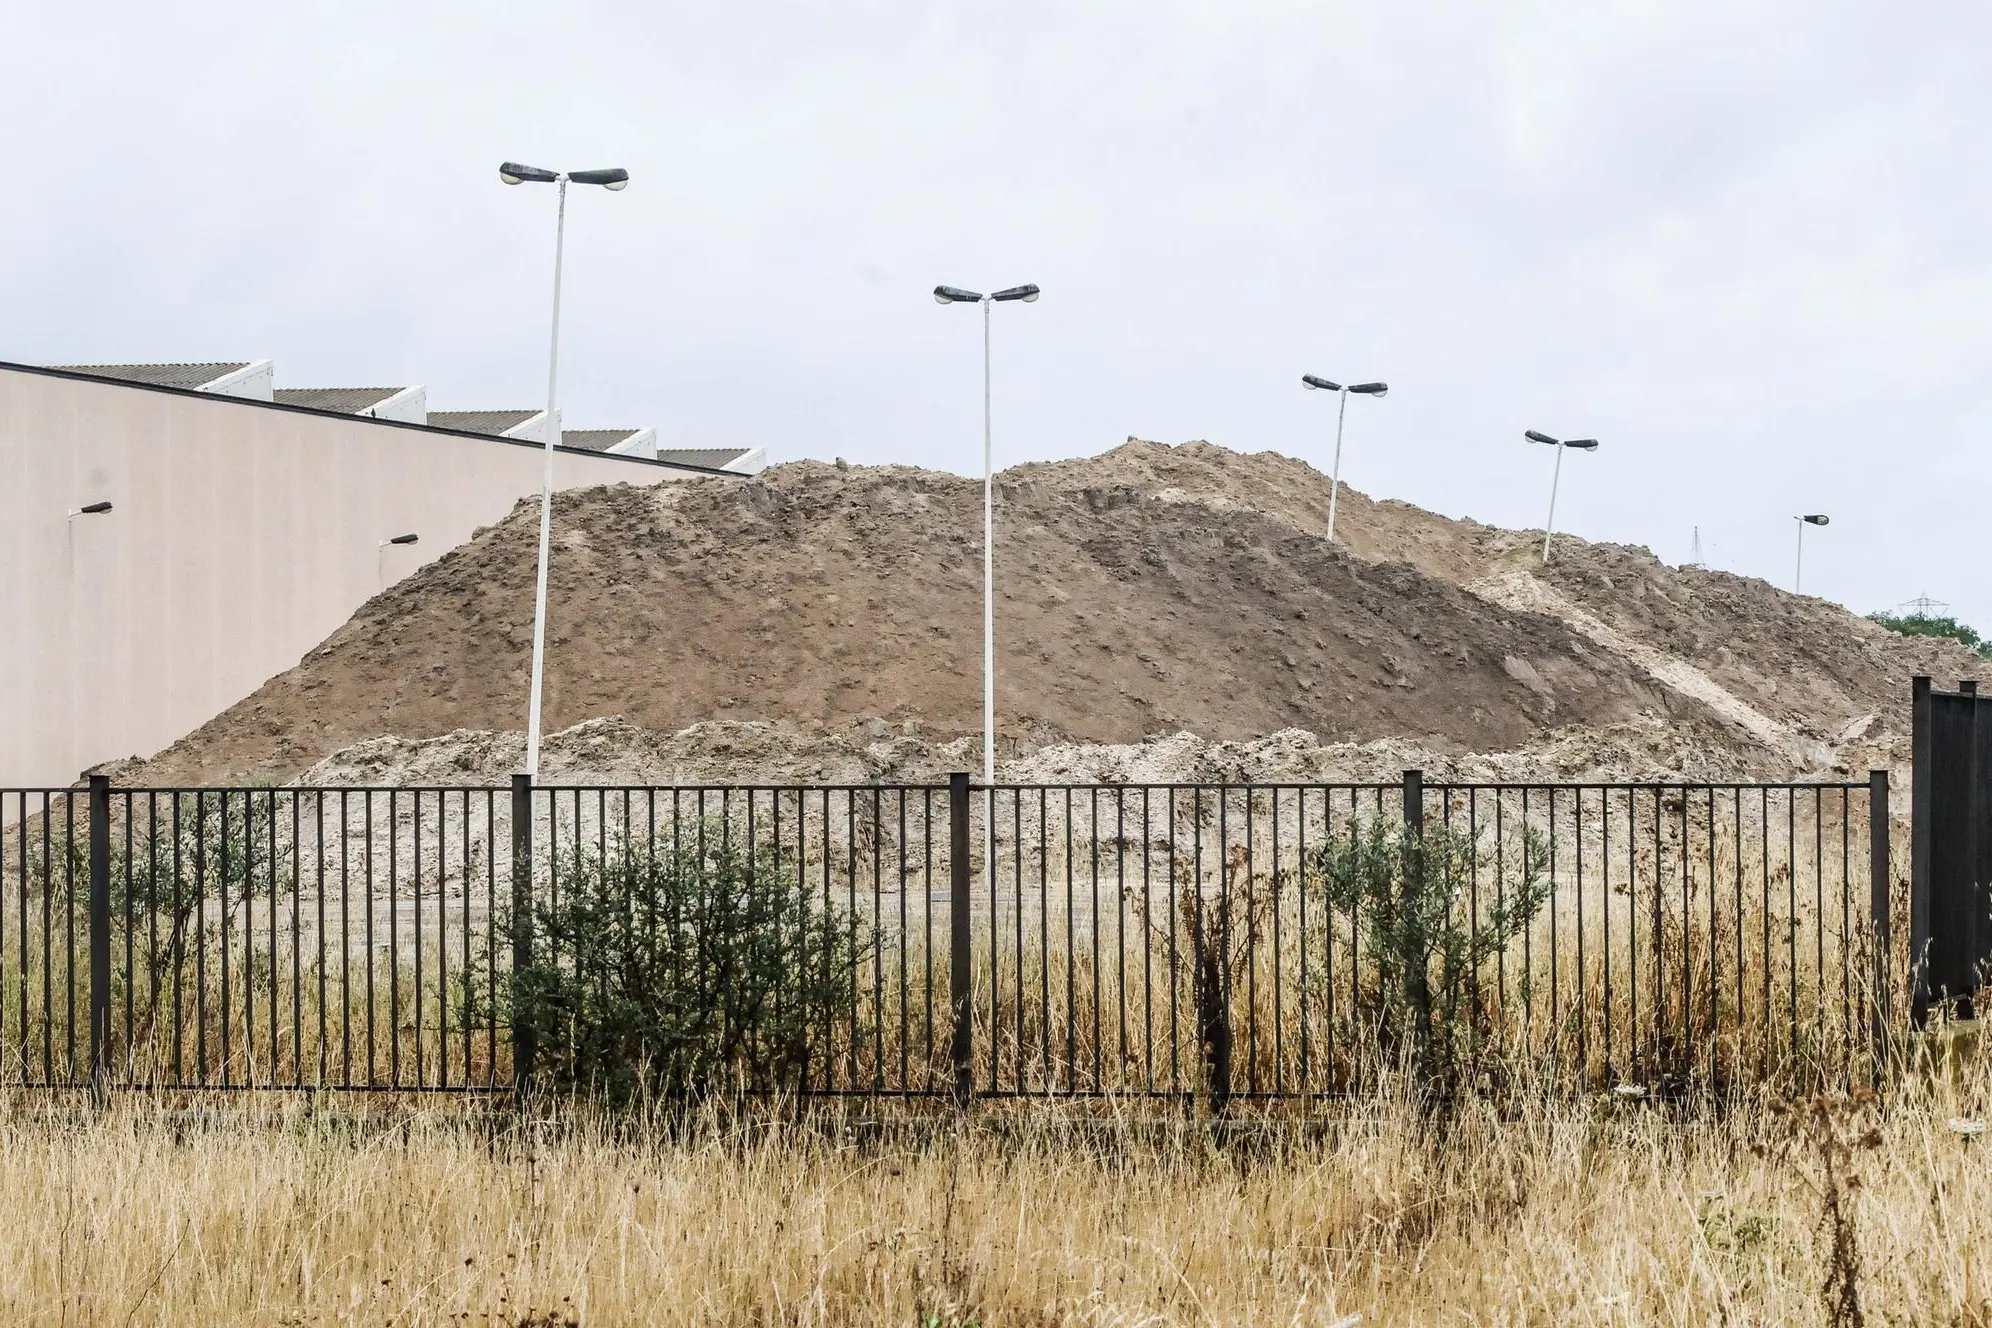 The heaps of industrial waste that have come under investigation (Angelo Cucca)